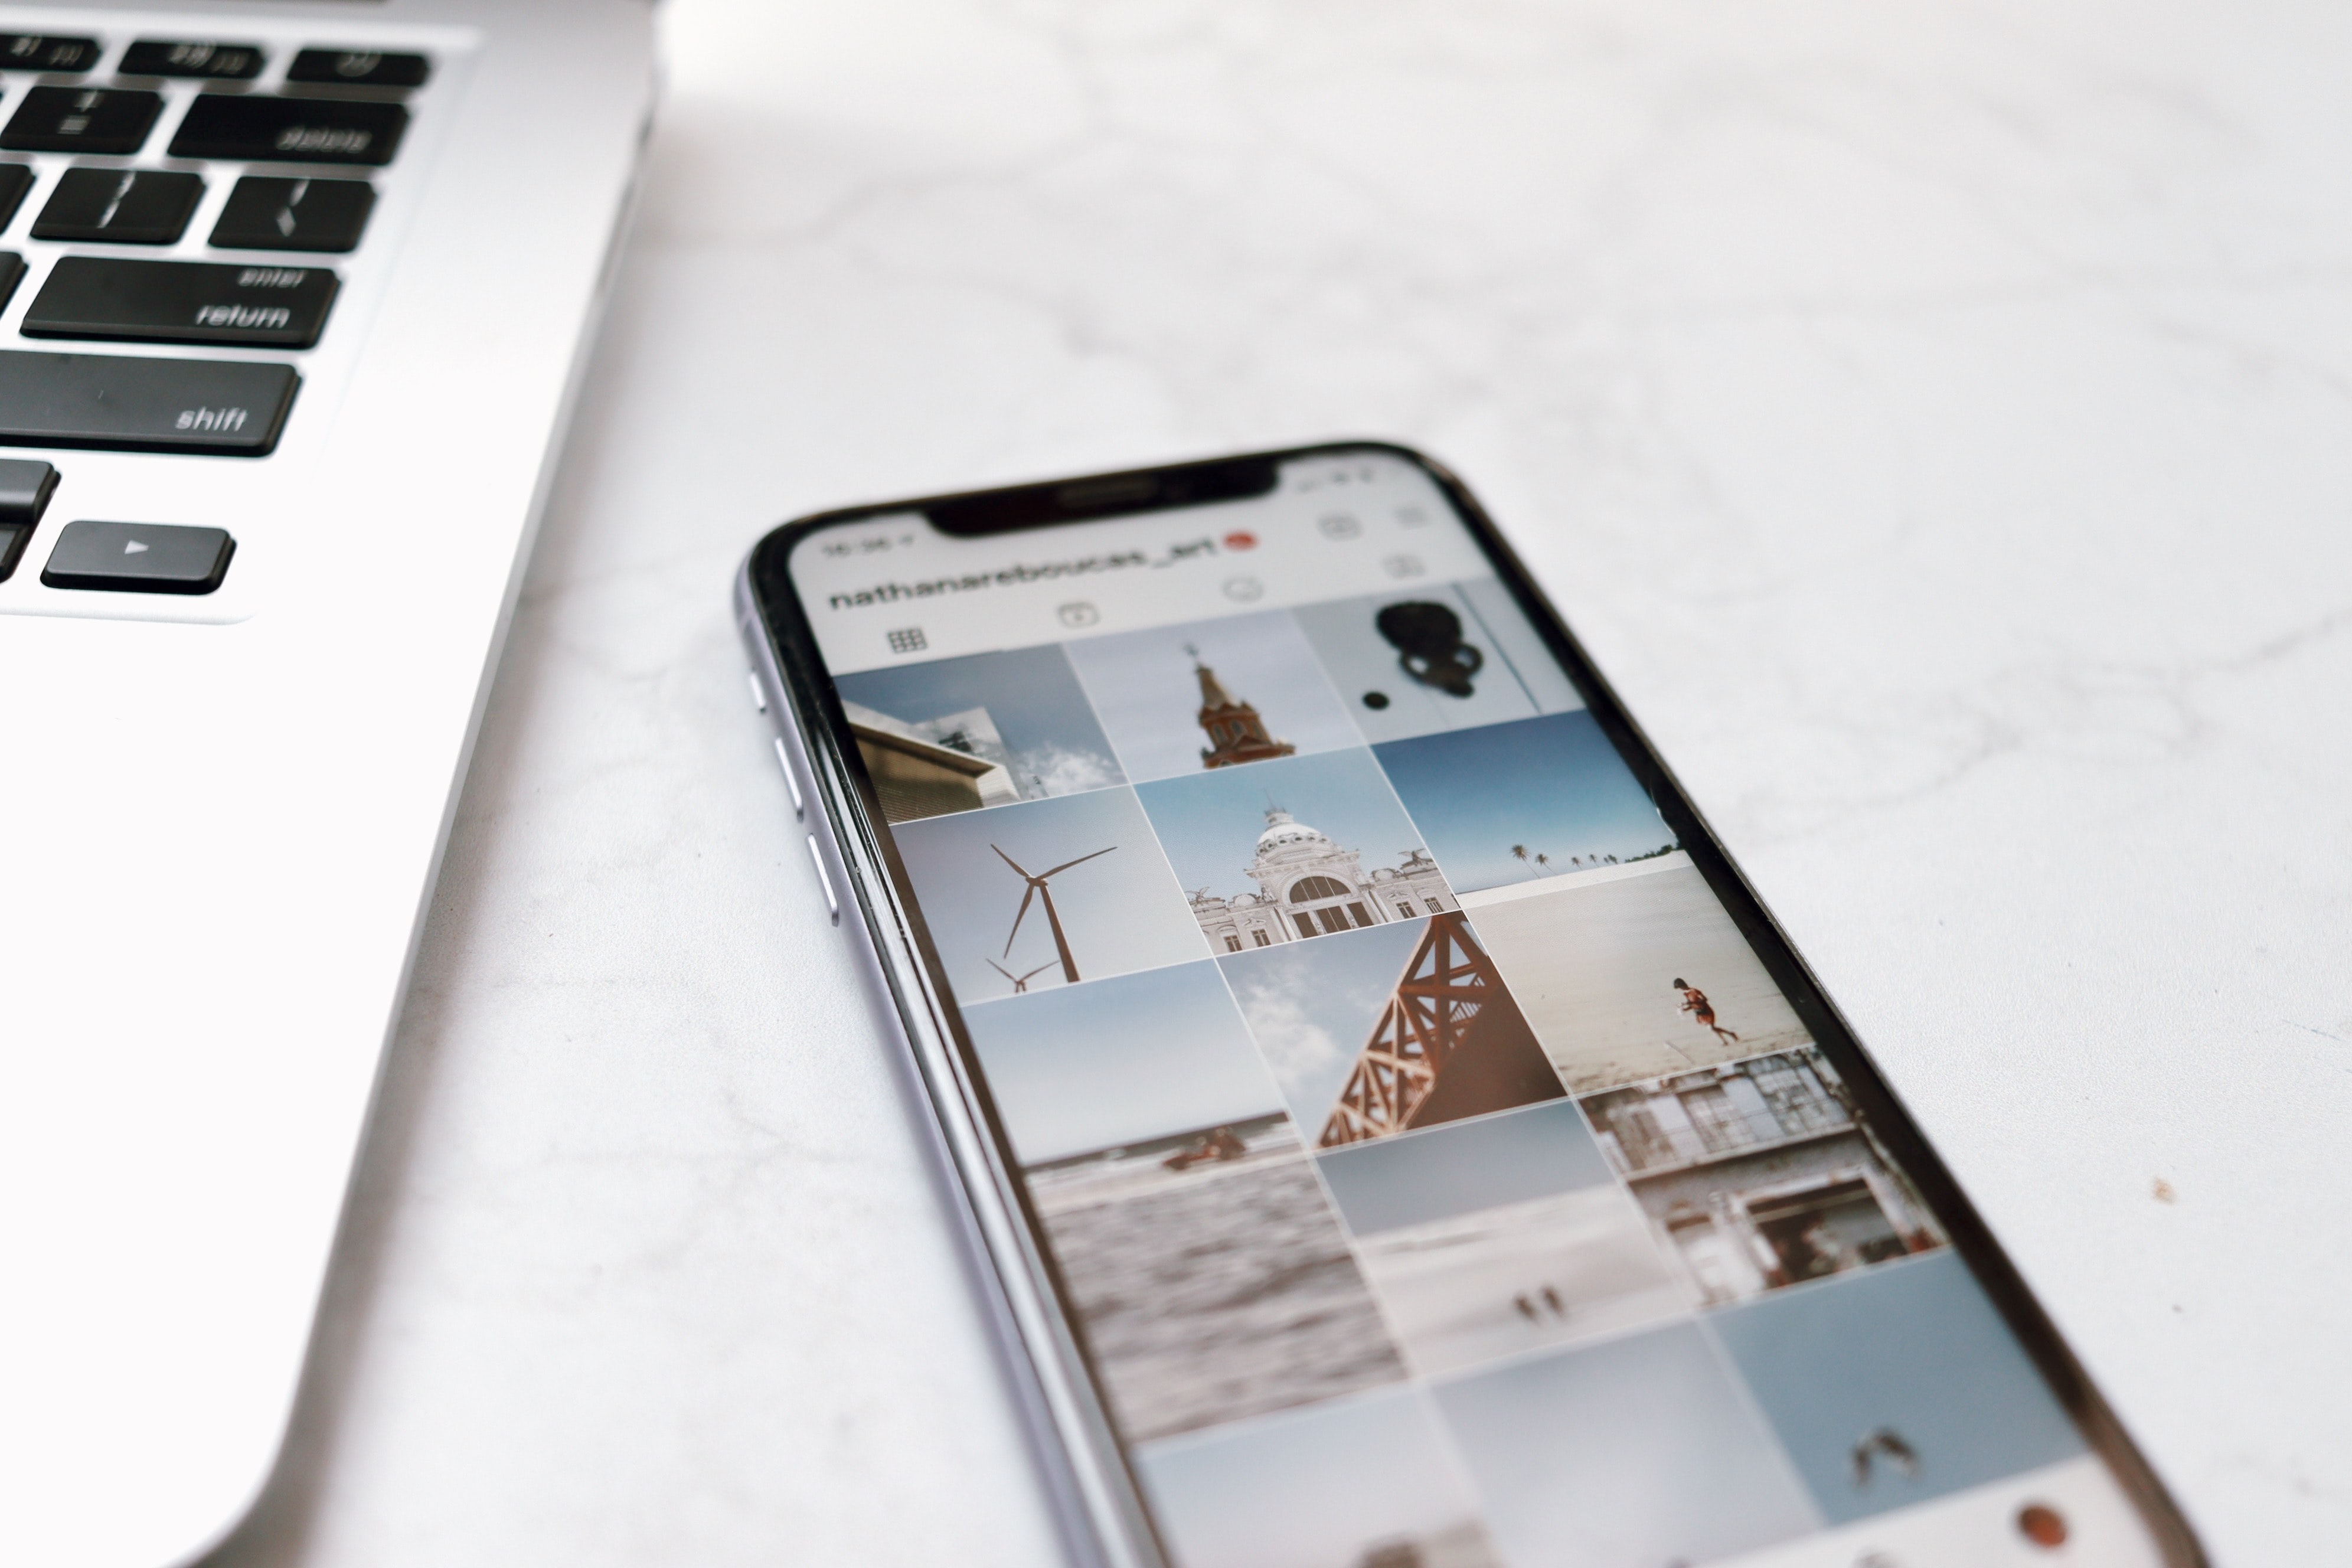 Feed Instagram : comment le construire ? (Exemples)